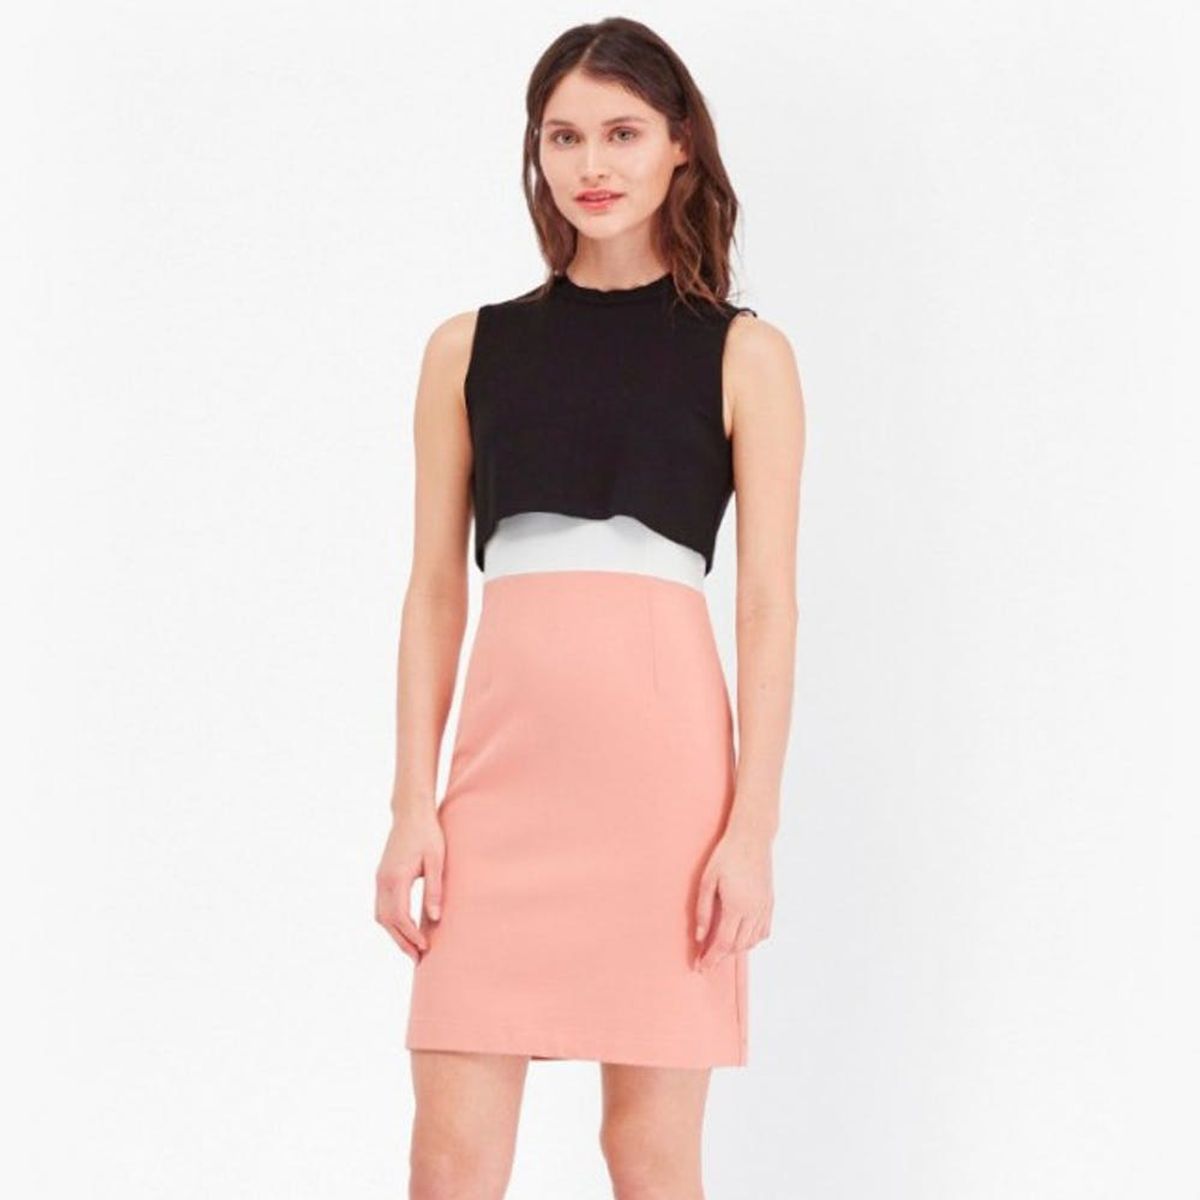 12 Dresses You Can Wear to Work and on Your Valentine’s Day Date